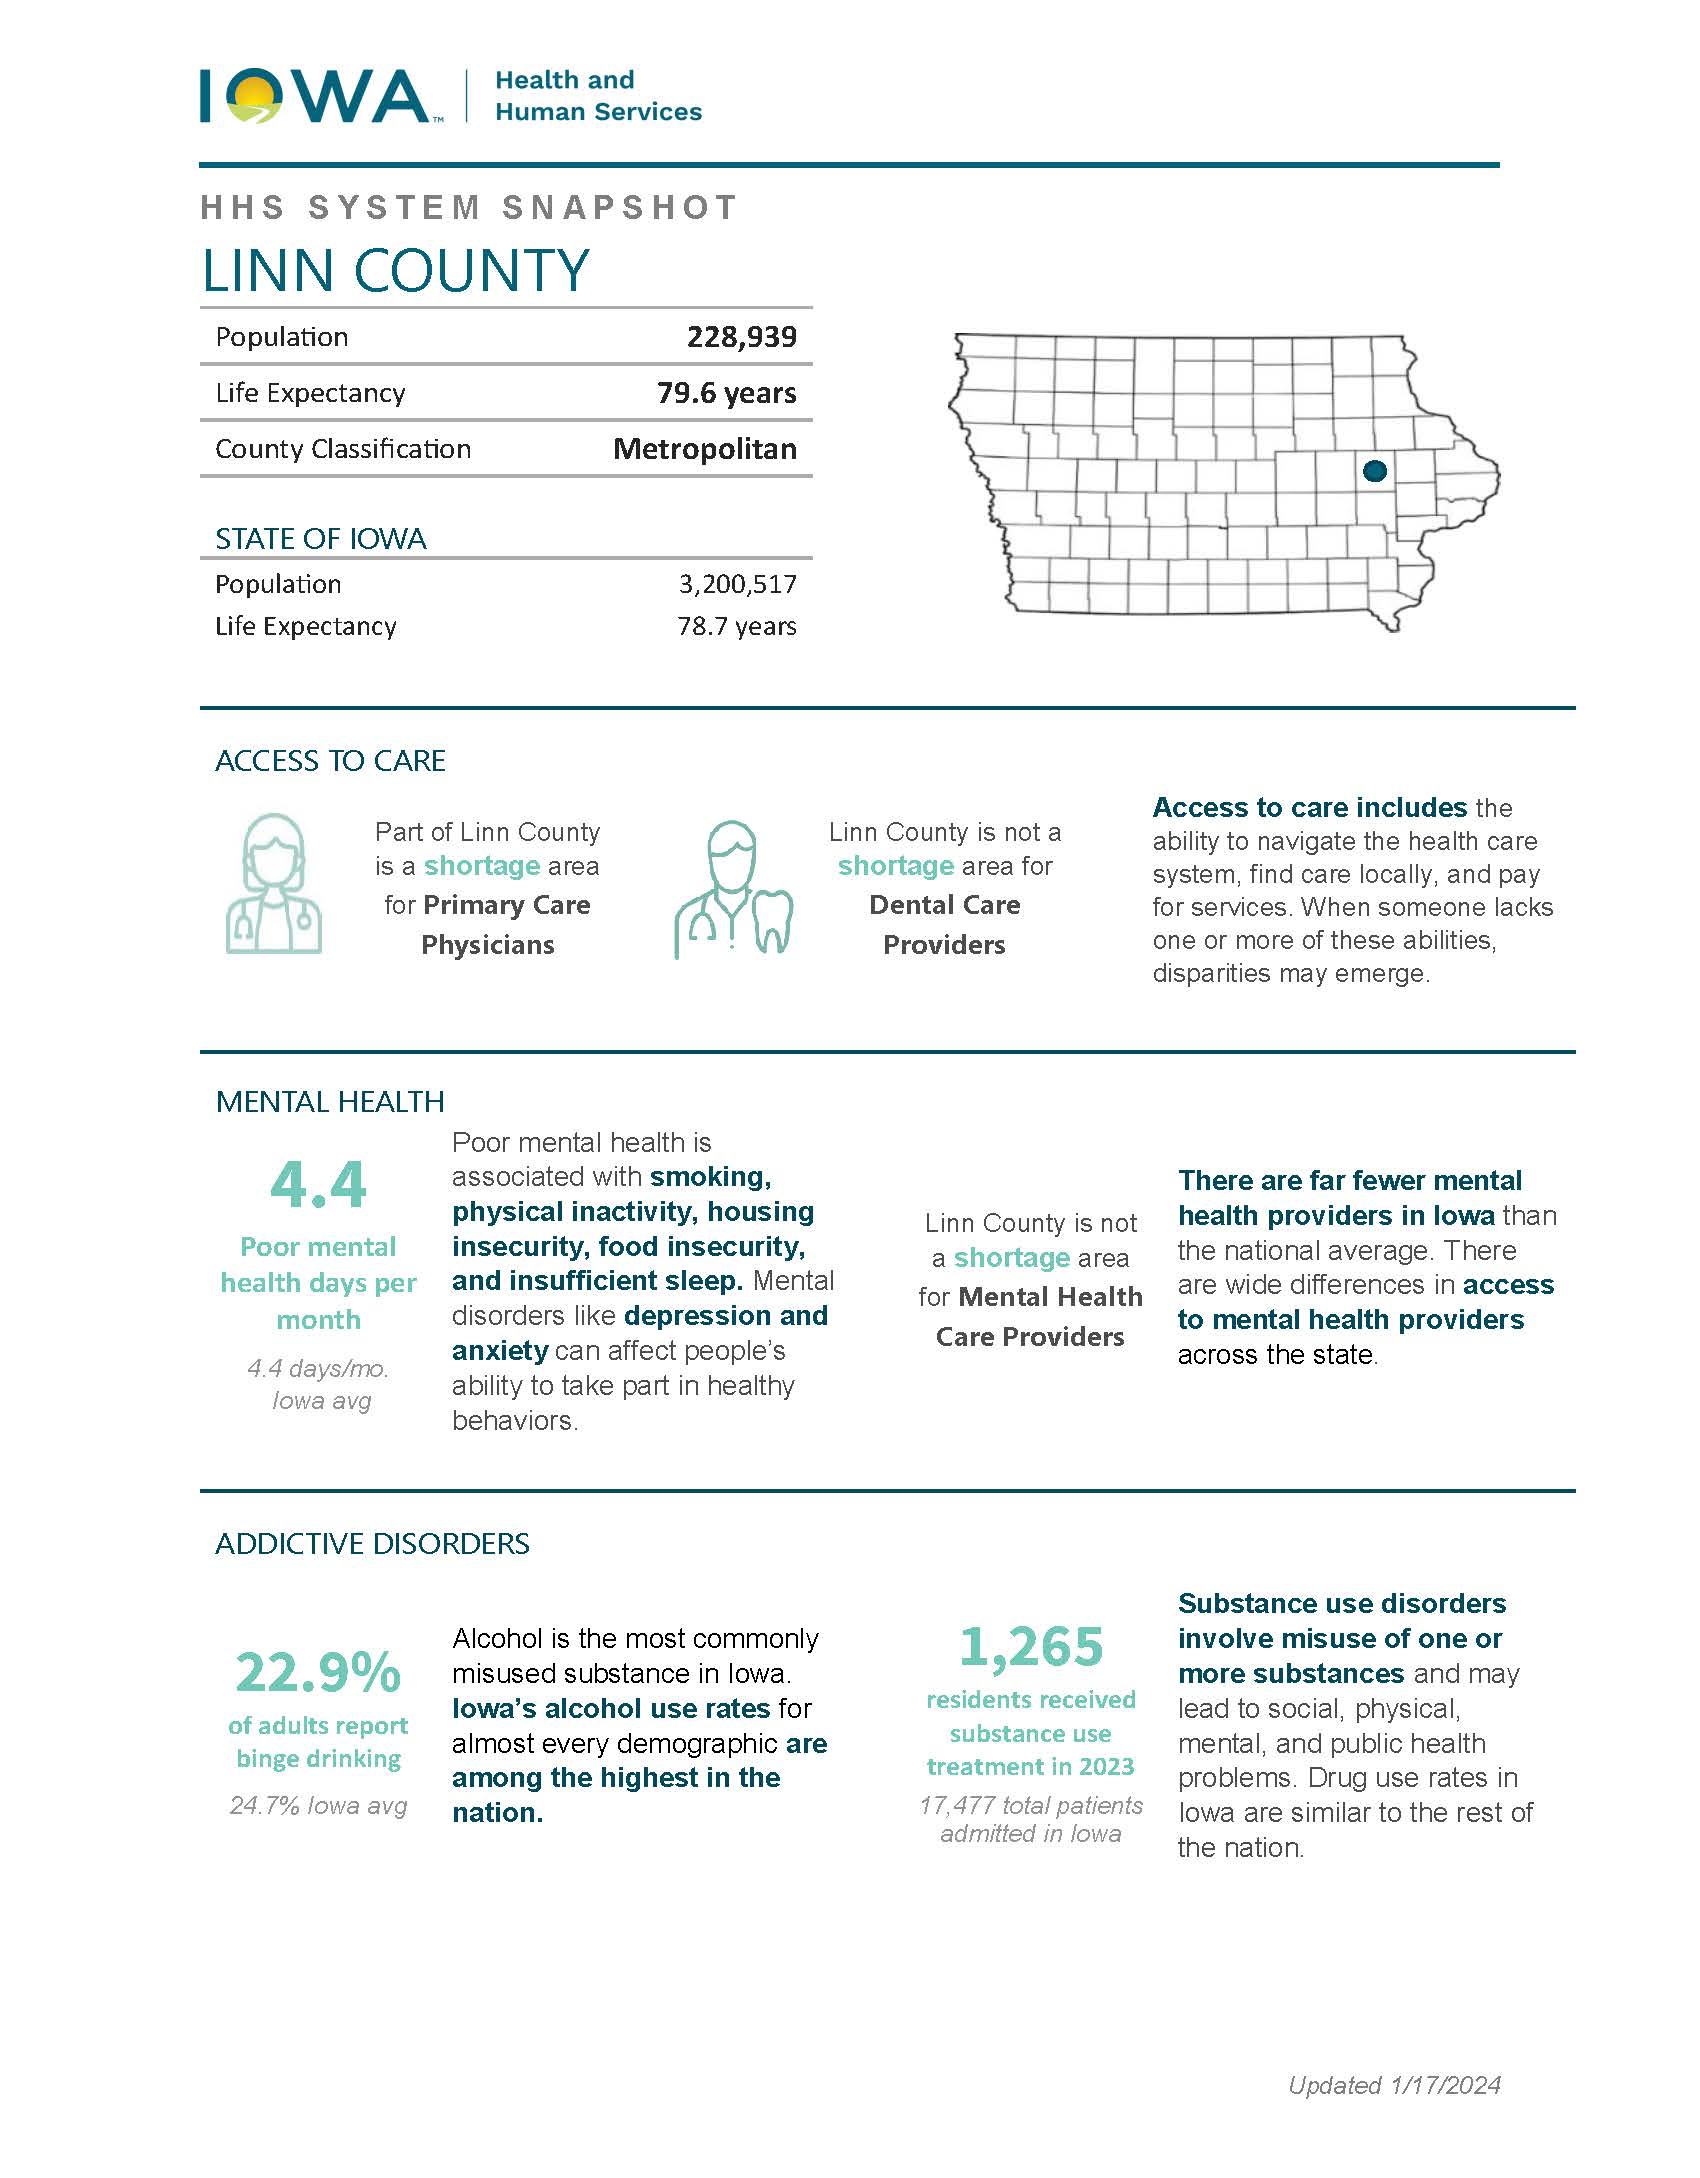 Example of Linn County HHS System Snapshot PDF